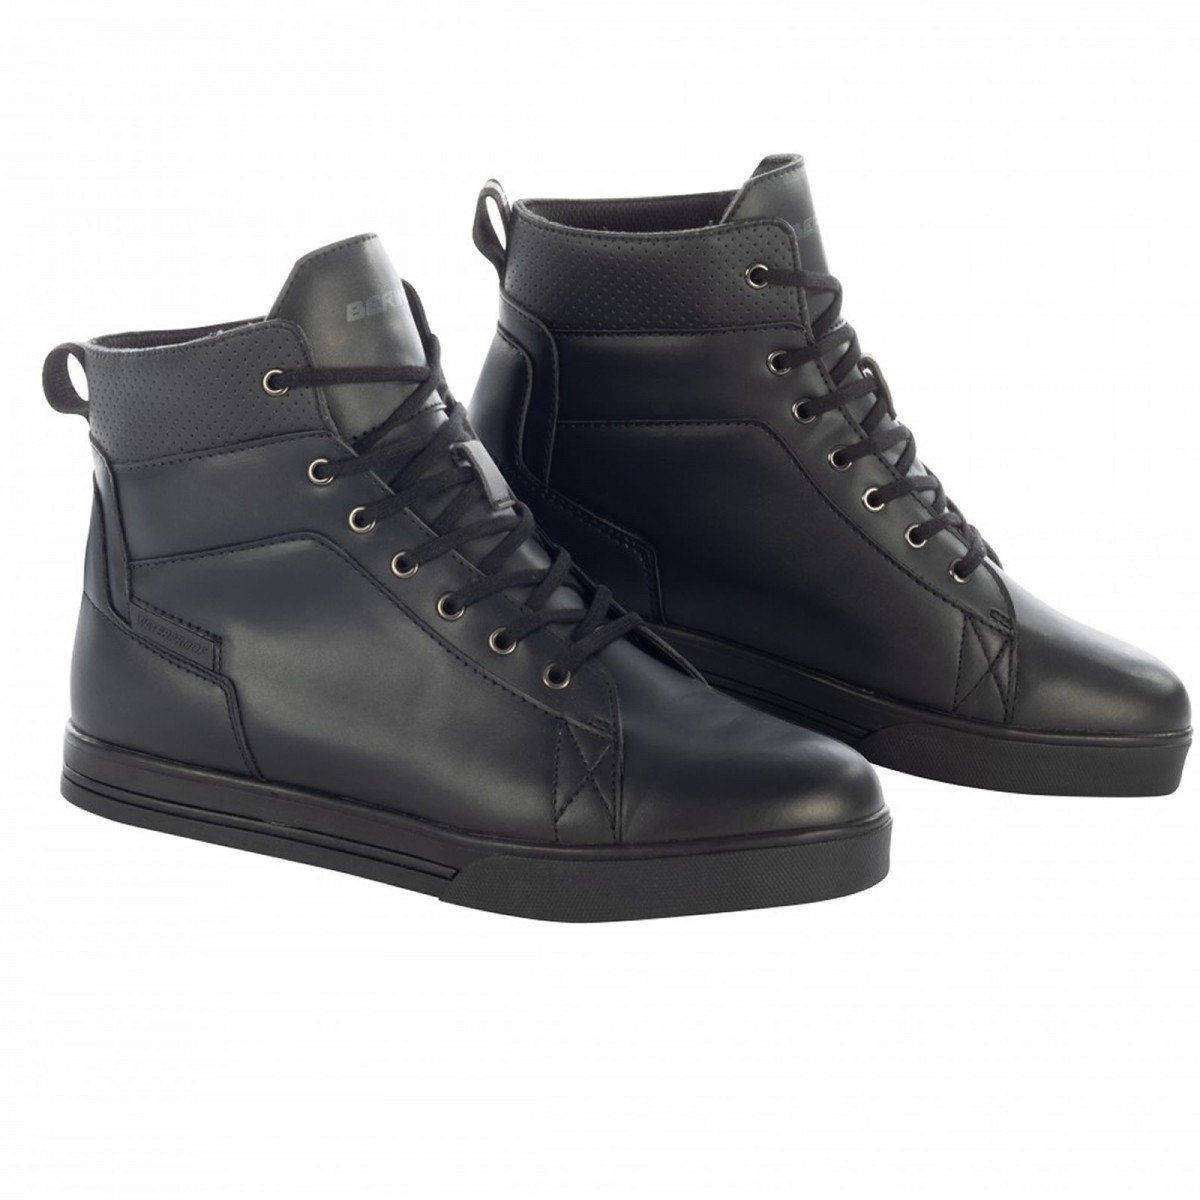 Image of Bering Indy Noir Chaussures Taille 46